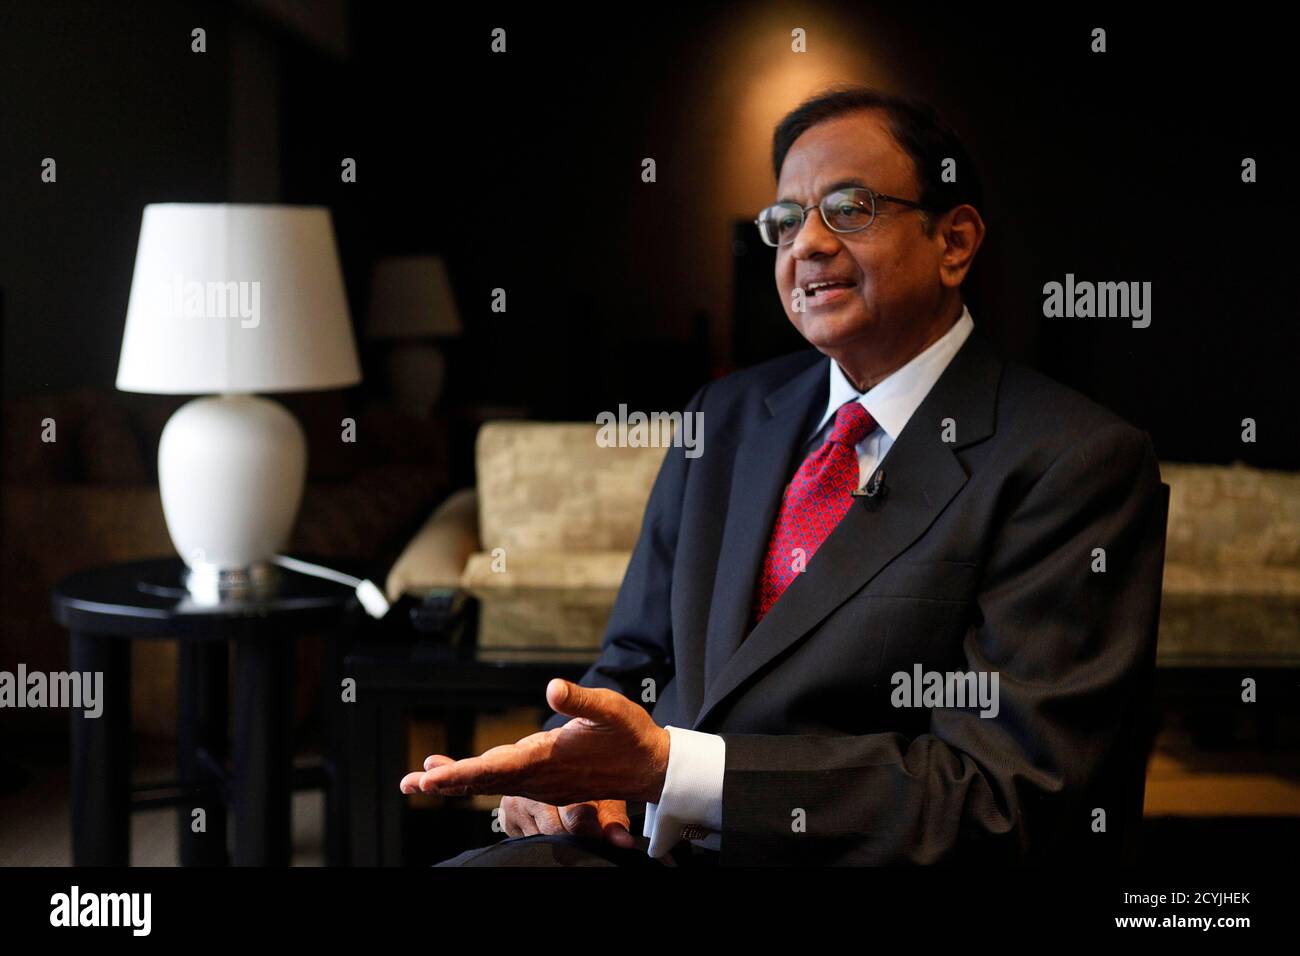 India's Finance Minister P. Chidambaram speaks during an interview with Reuters at a hotel during his visit for the G20 meeting in Mexico City November 4, 2012. India's economy should expand by 5.5 percent to 6.0 percent this year and growth should then return to 7 percent next year, Chidambaram told Reuters on Sunday, and said inflation was at an 'unacceptable level'. The G20 meeting of finance ministers and central bank governors in Mexico will take place from November 4 to 5. To match Interview INDIA-GDP/ REUTERS/Edgard Garrido (MEXICO - Tags: BUSINESS POLITICS) Stock Photo